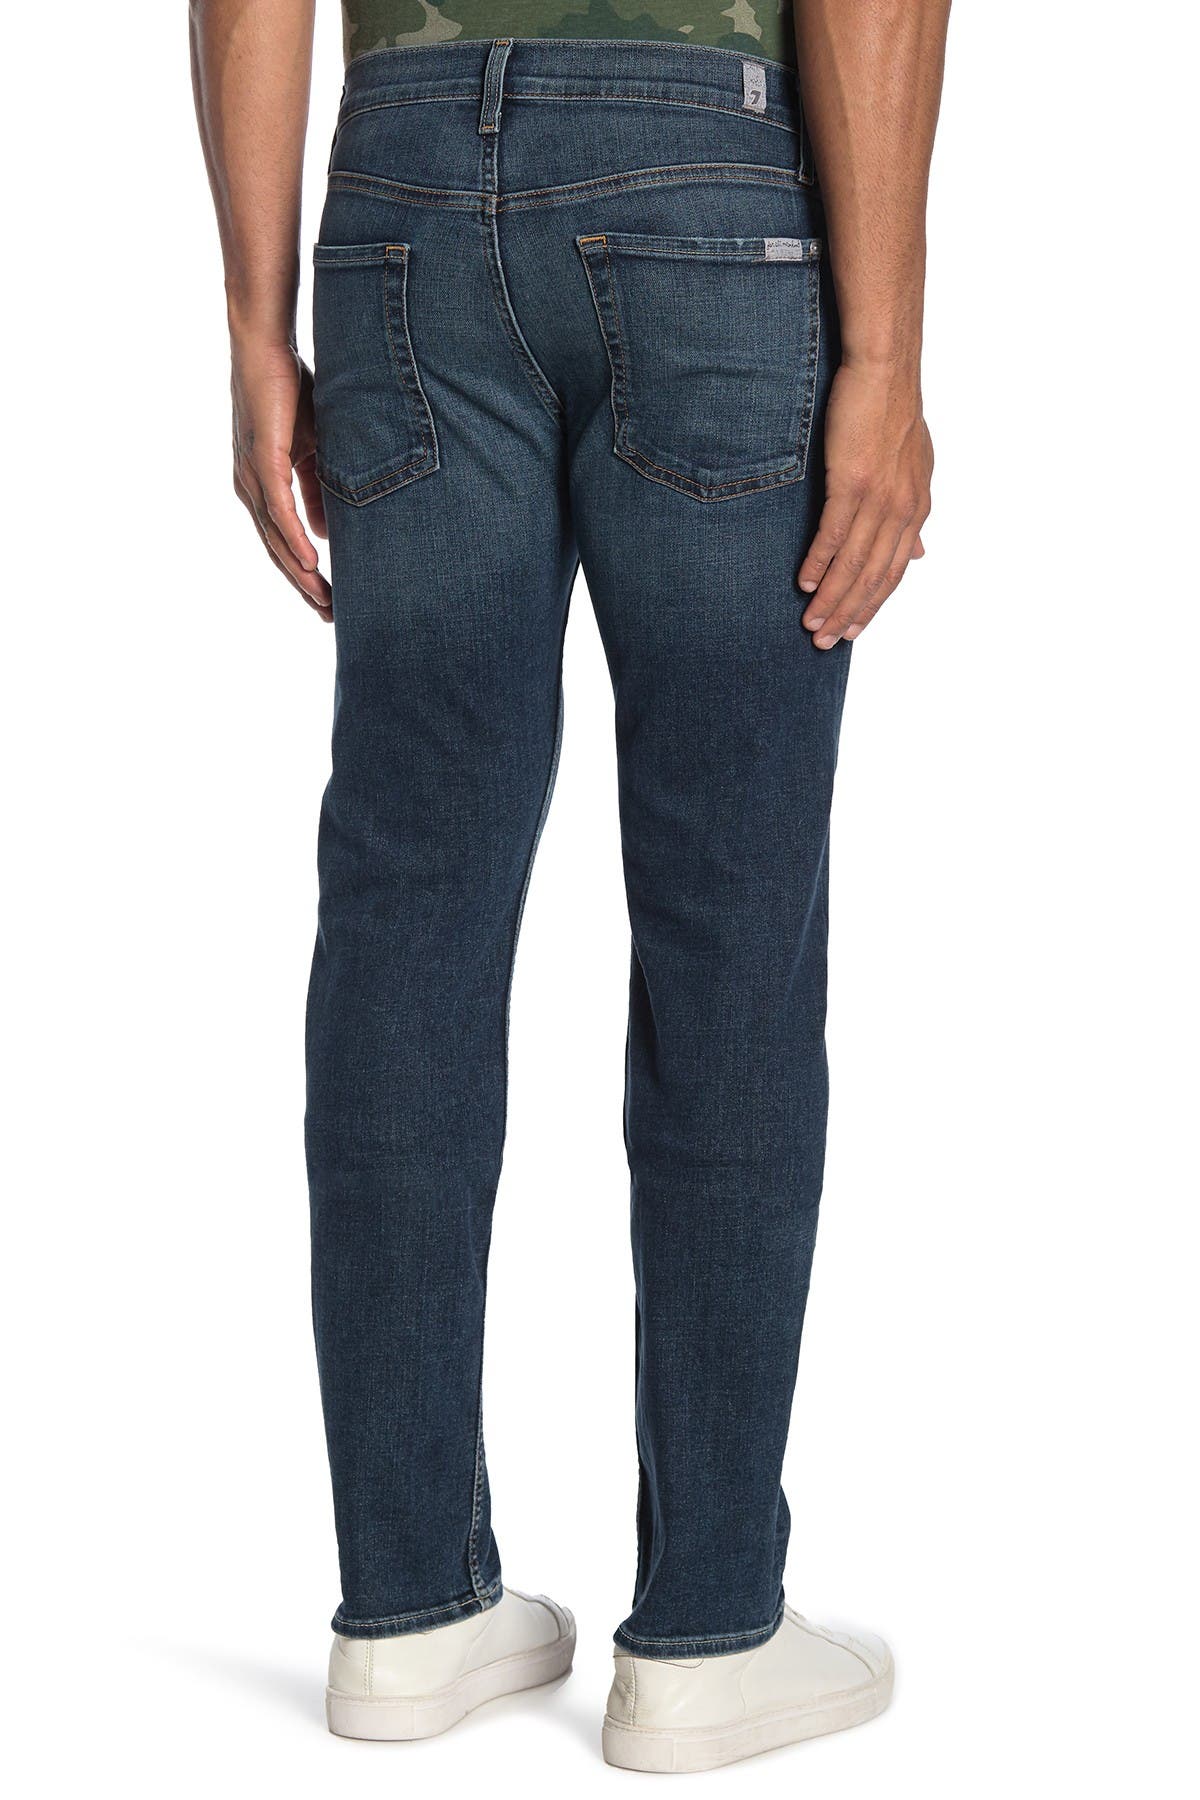 7 For All Mankind Slimmy NY Dark Blue Jean Slim Homme